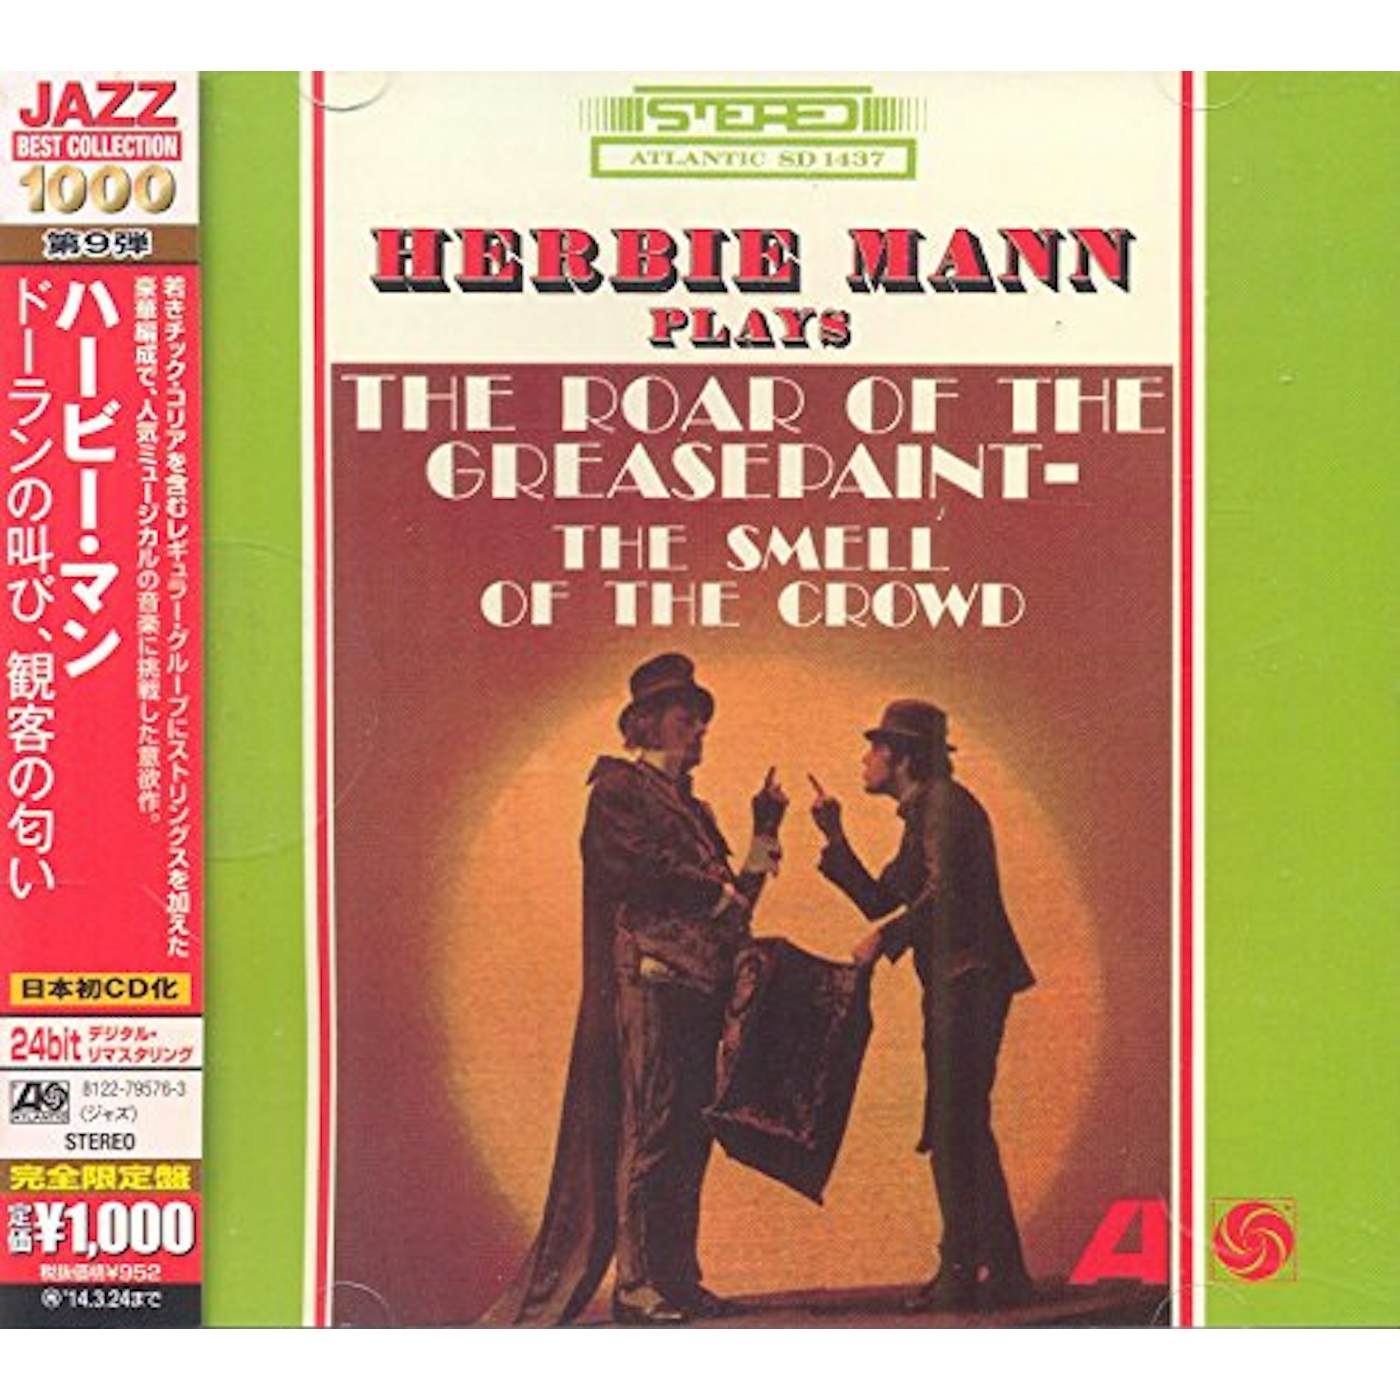 Herbie Mann ROAR OF THE GREASEPAINT THE SMELL OF THE CROWD CD